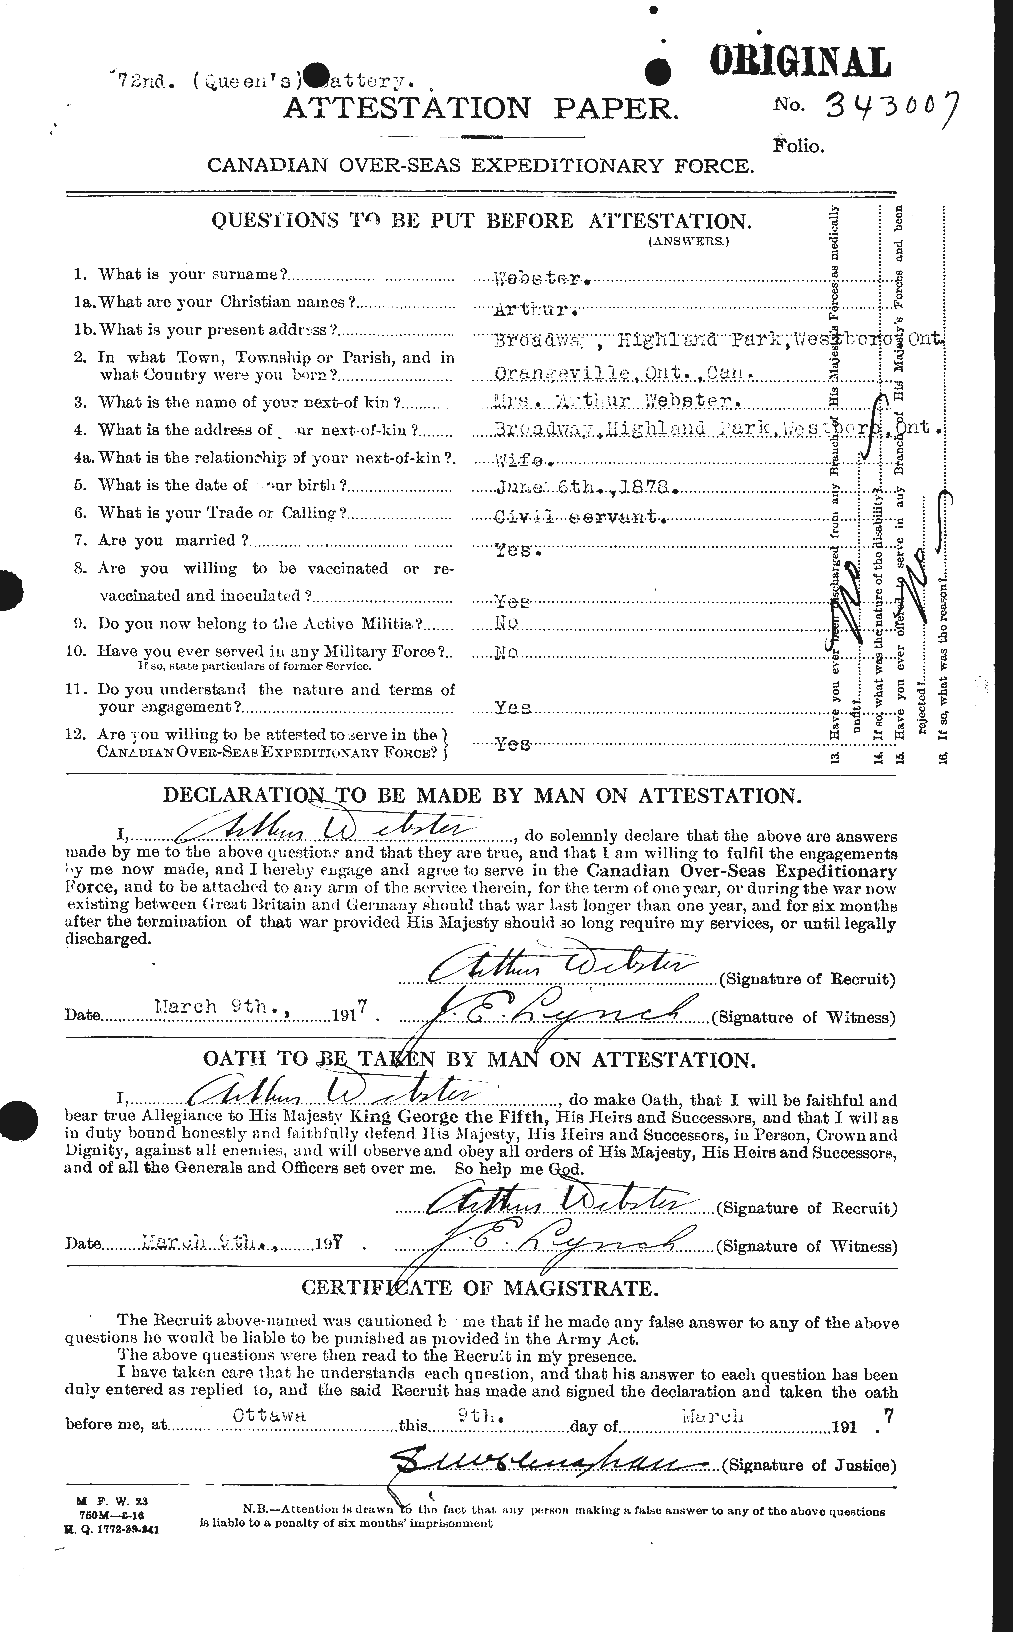 Personnel Records of the First World War - CEF 670259a